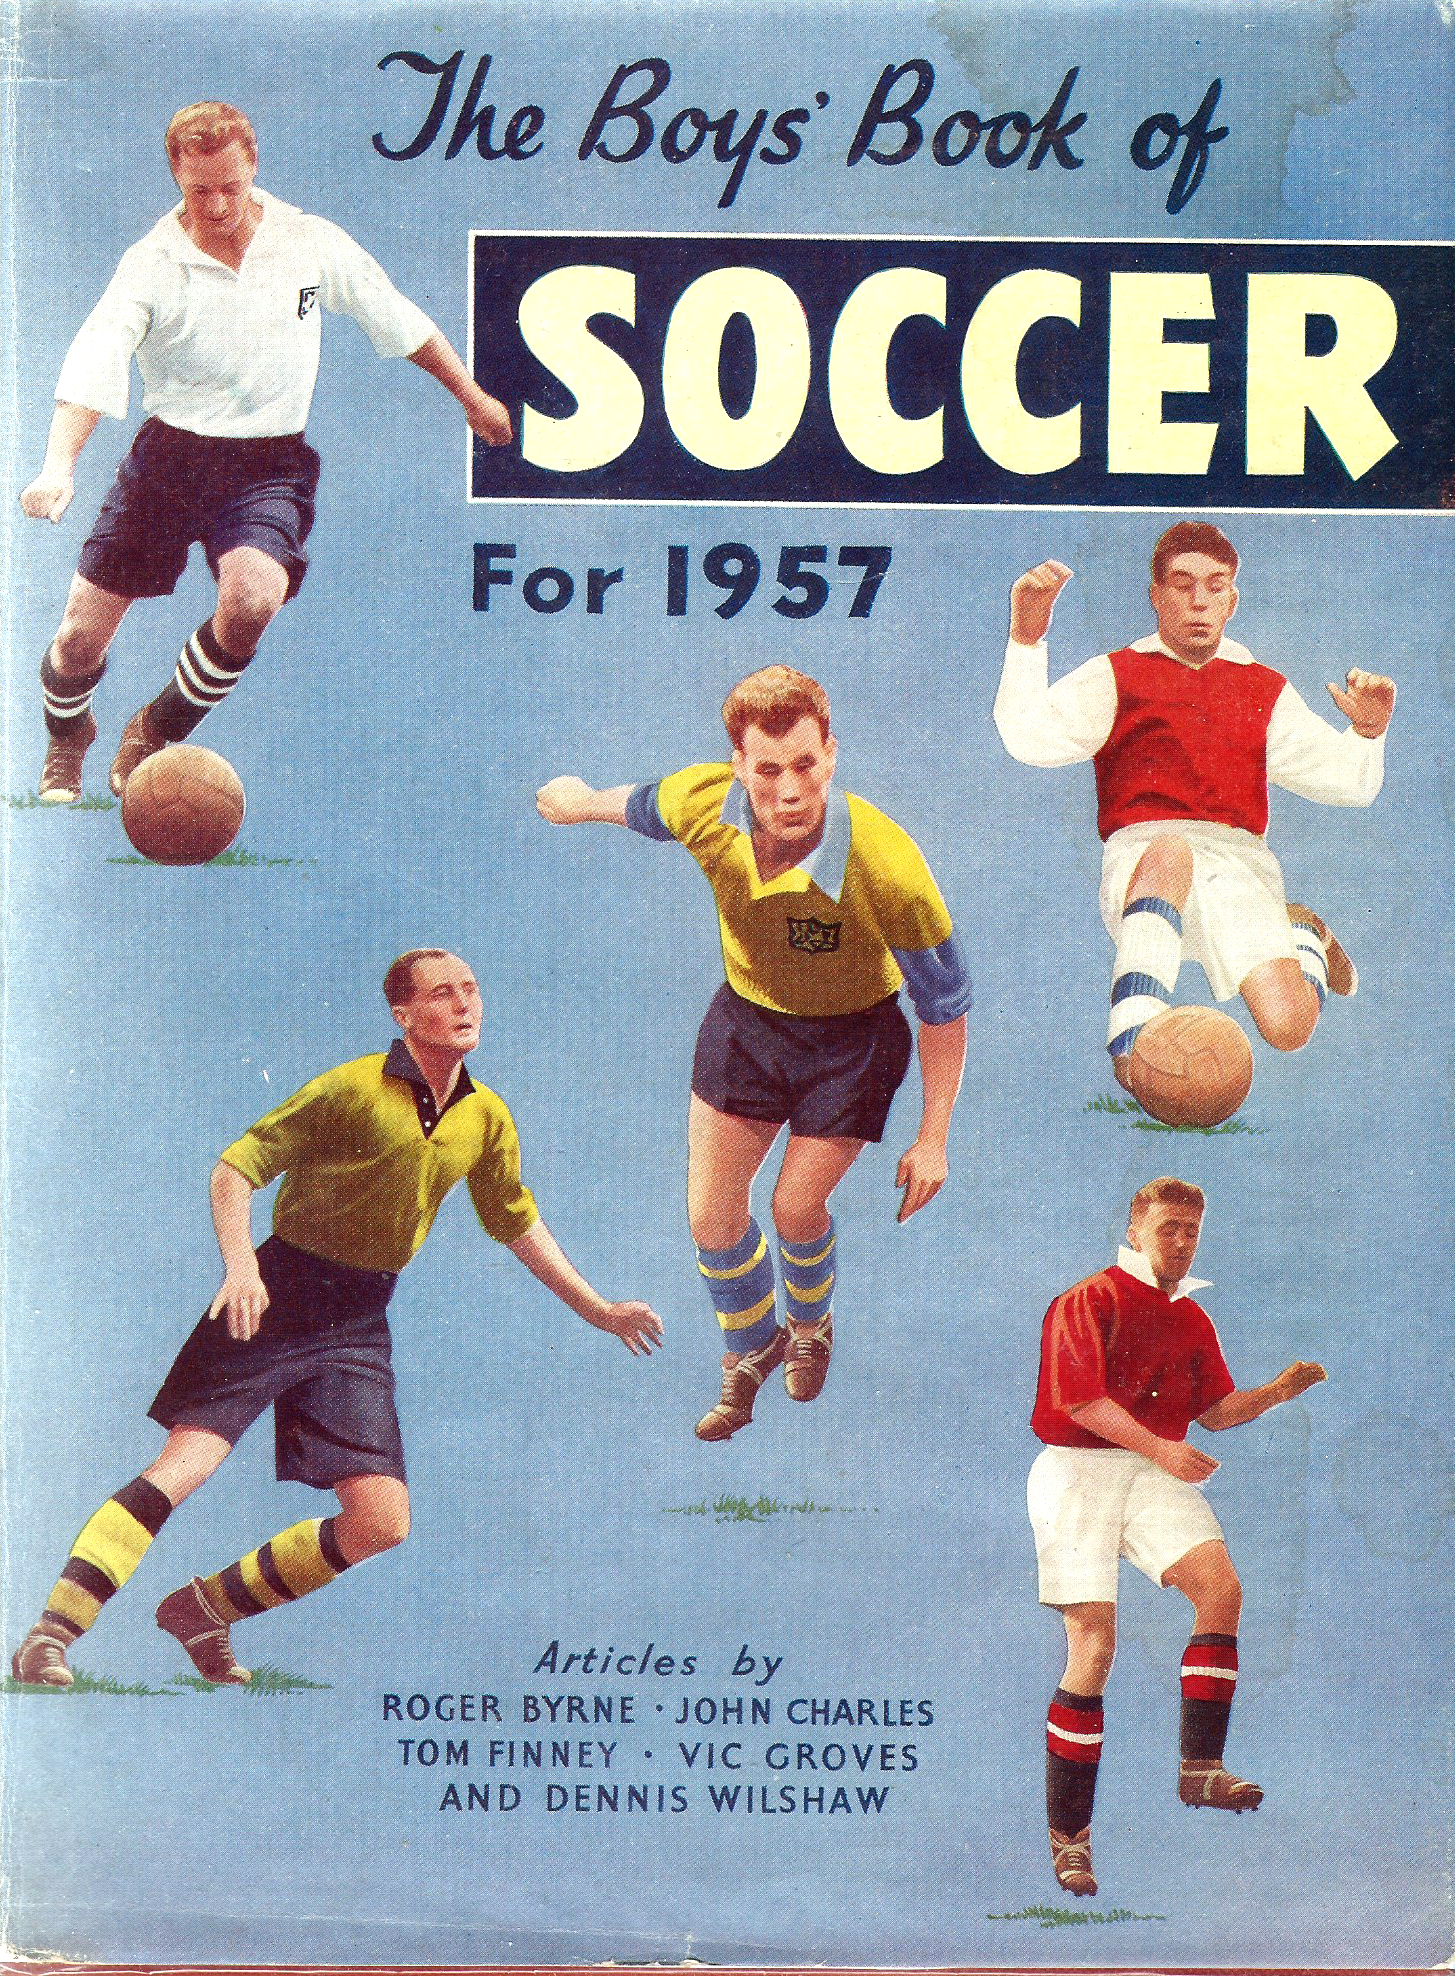 The Boys Book of Soccer 1957